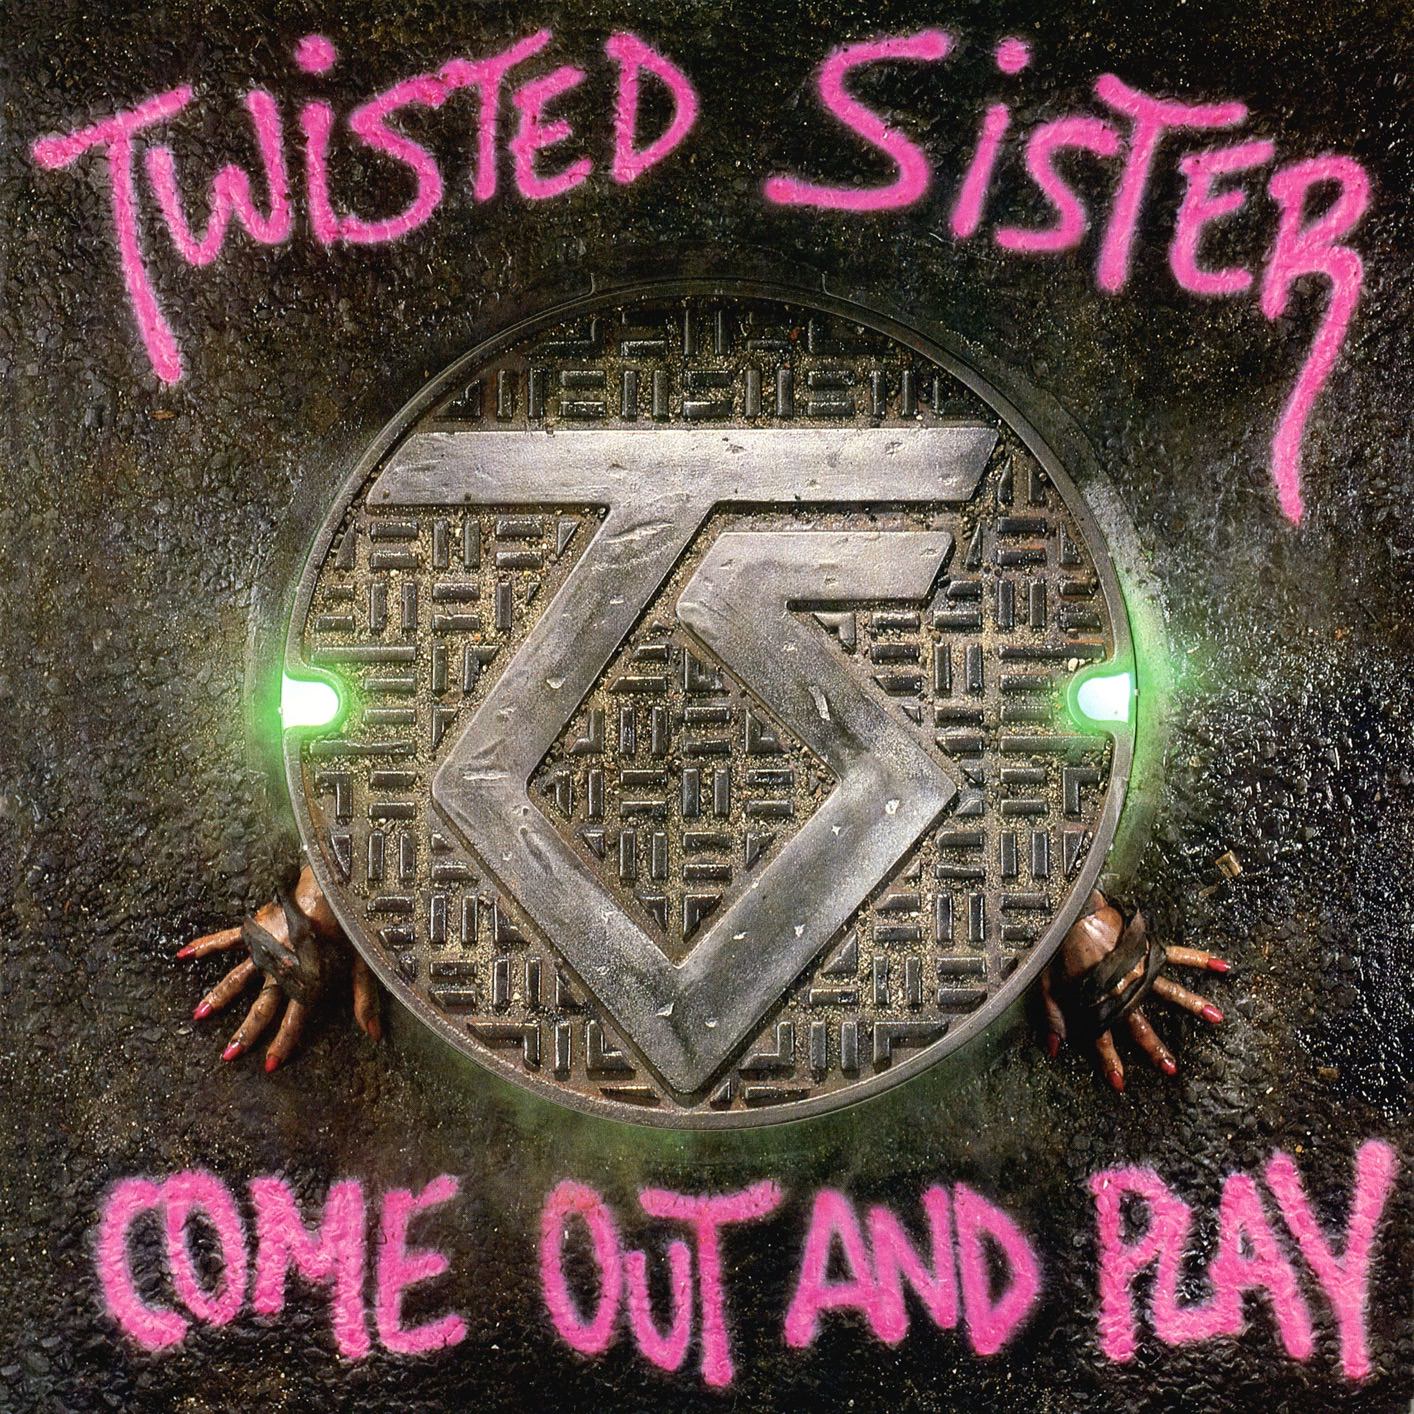 Twisted Sister - Come Out And Play (1985/2017) [Qobuz FLAC 24bit/96kHz]